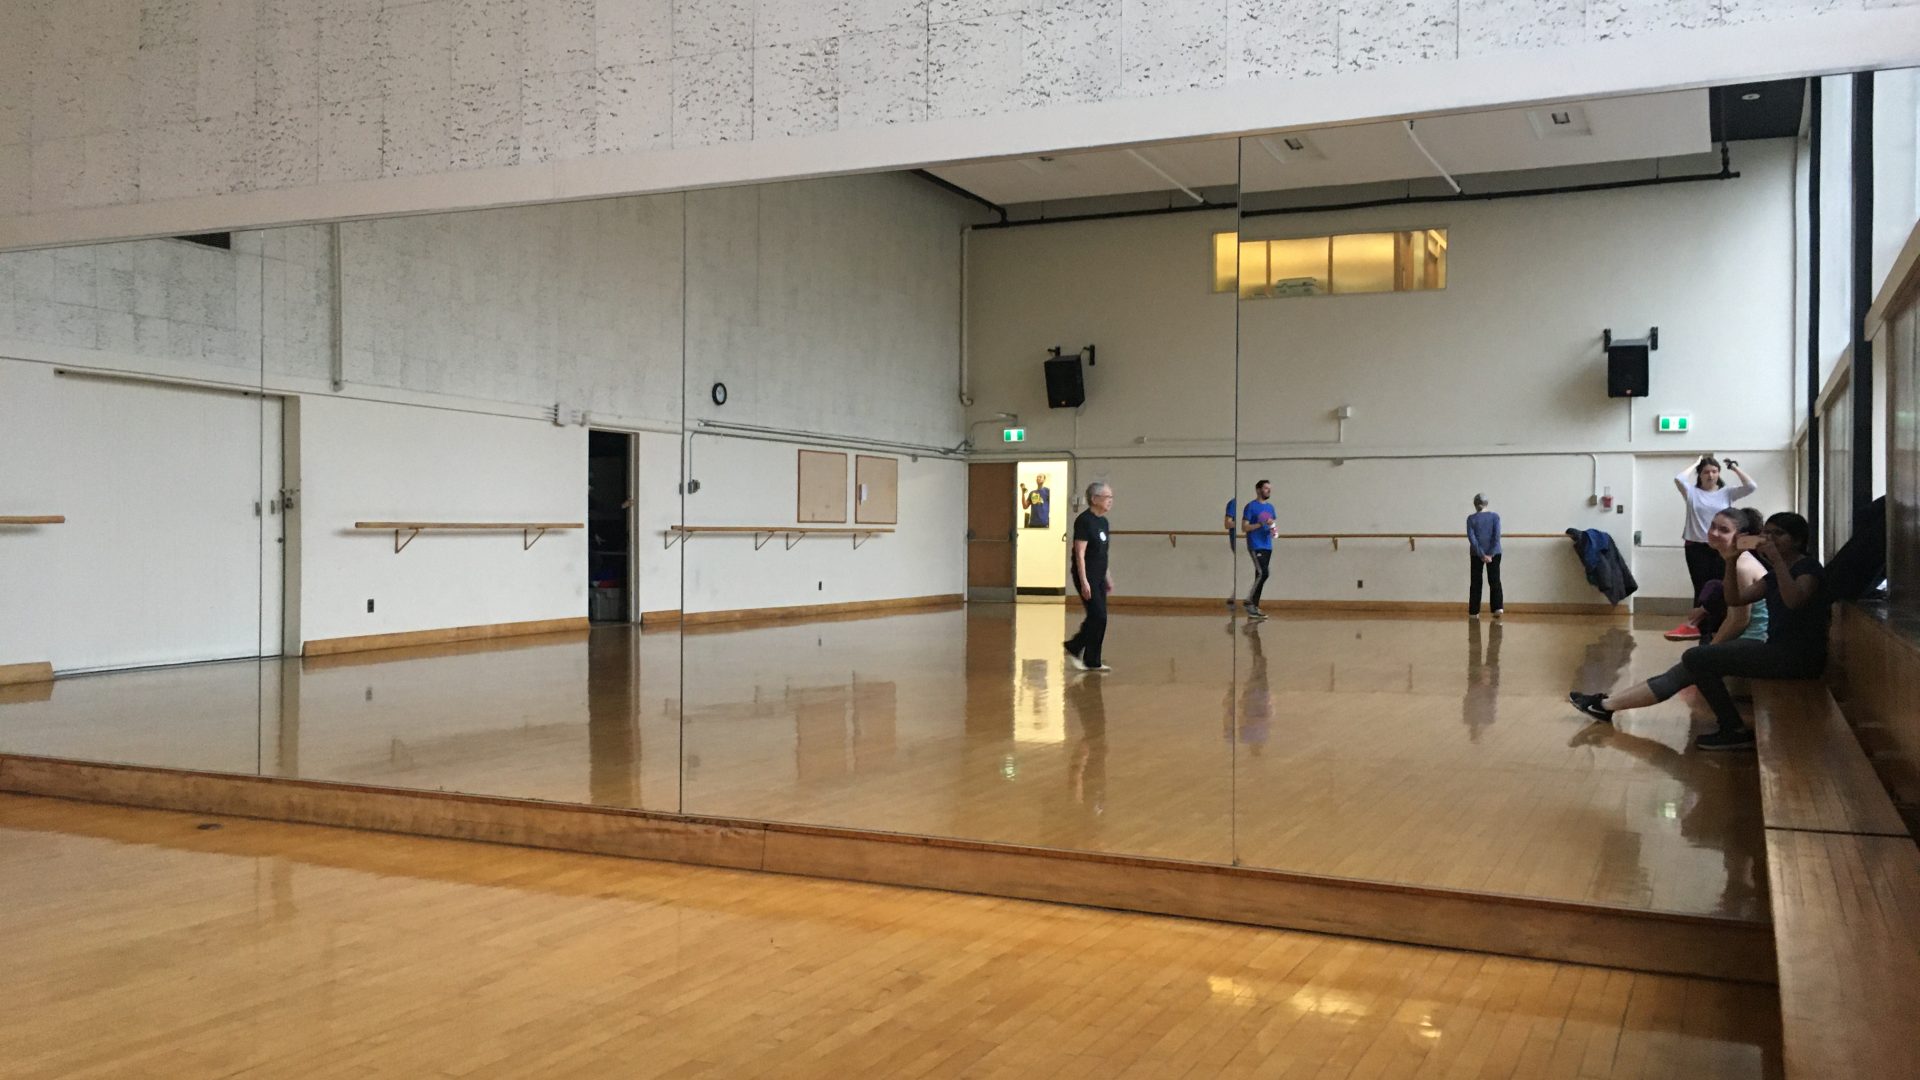 A large mirror fills an entire wall, which reflects a wood panelled room. A few people are milling around.